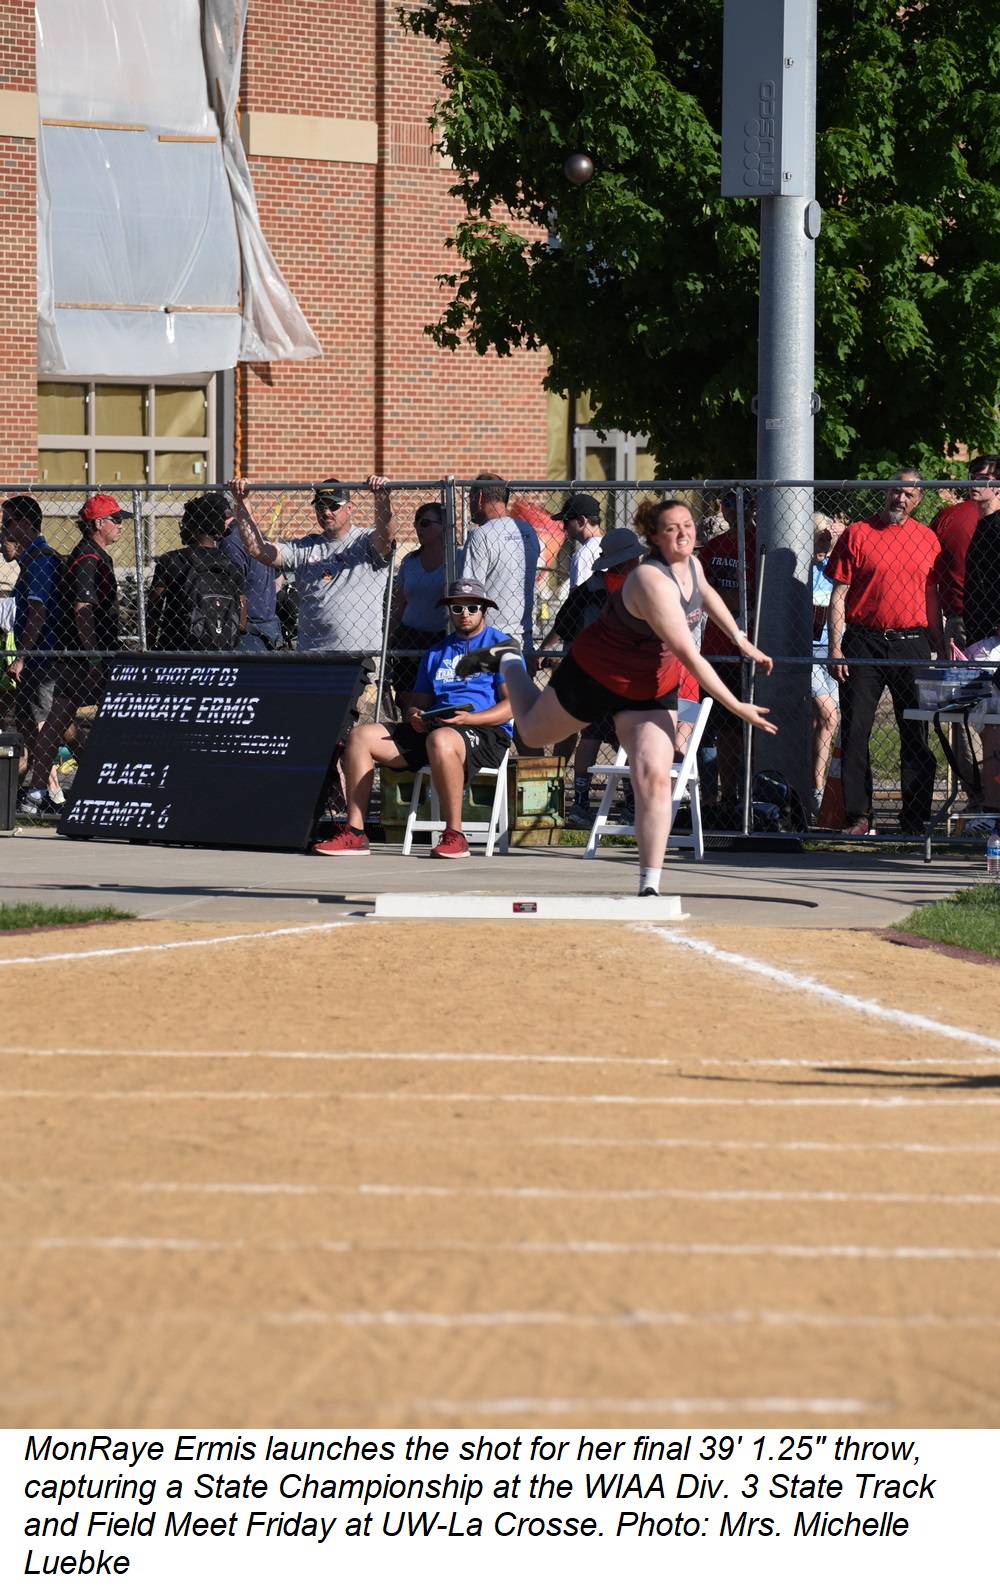 MonRaye Ermis launches the shot for her final 39' 1.25" throw to win the state championship Friday at UW-La Crosse.